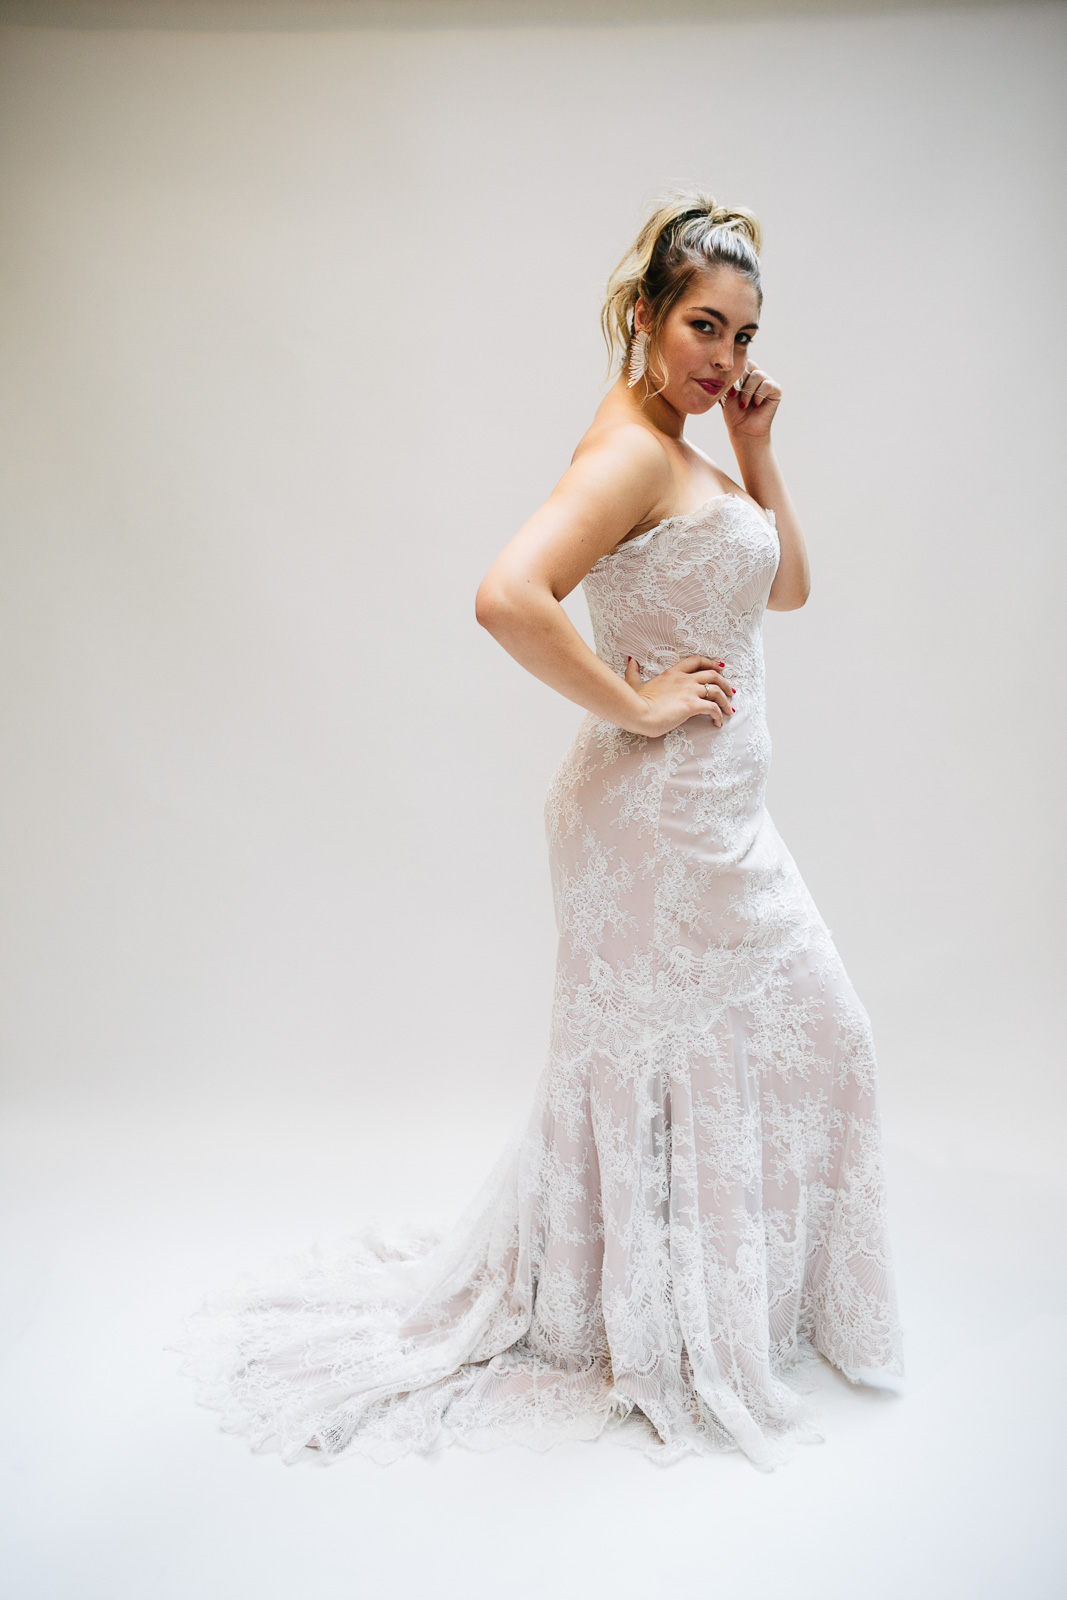 FASHION FRIDAY | New Collection Just for Indie Curvy Brides Arrives at Lovely Bride | Pretty Pear Bride